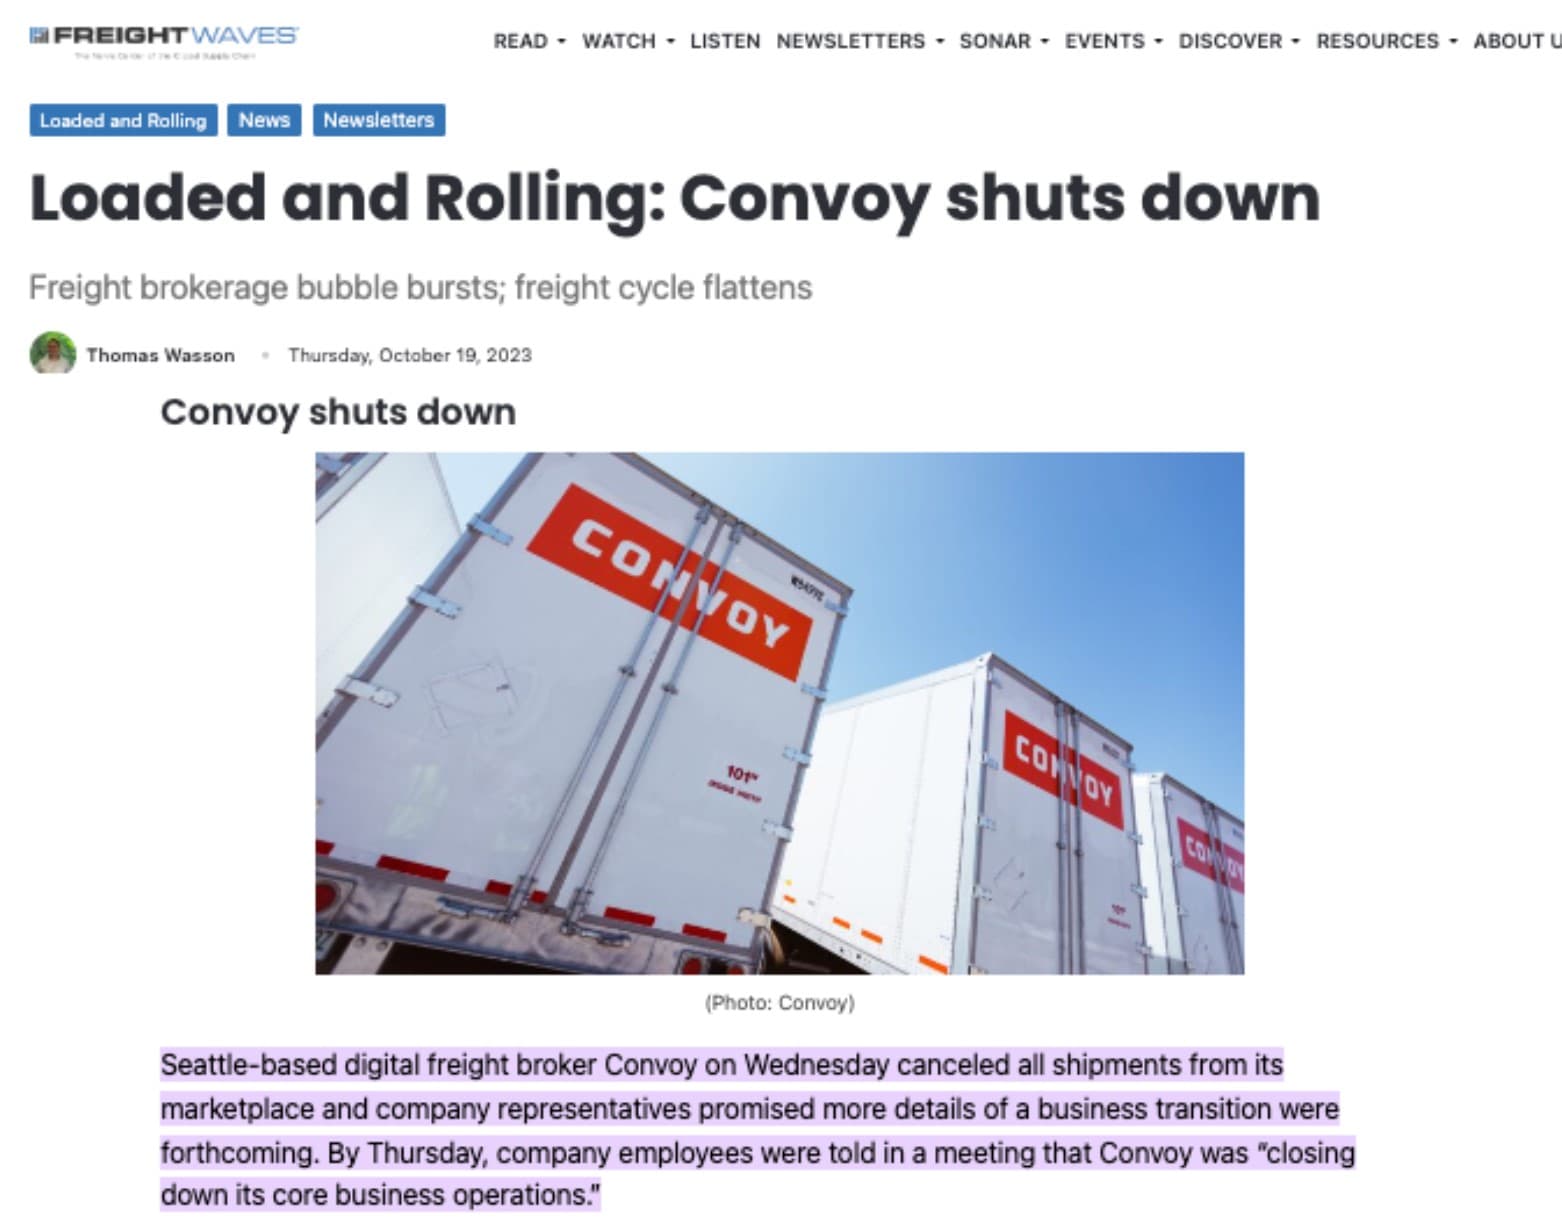 Convoy, the $3.8B valued VC-backed freight brokerage shut down